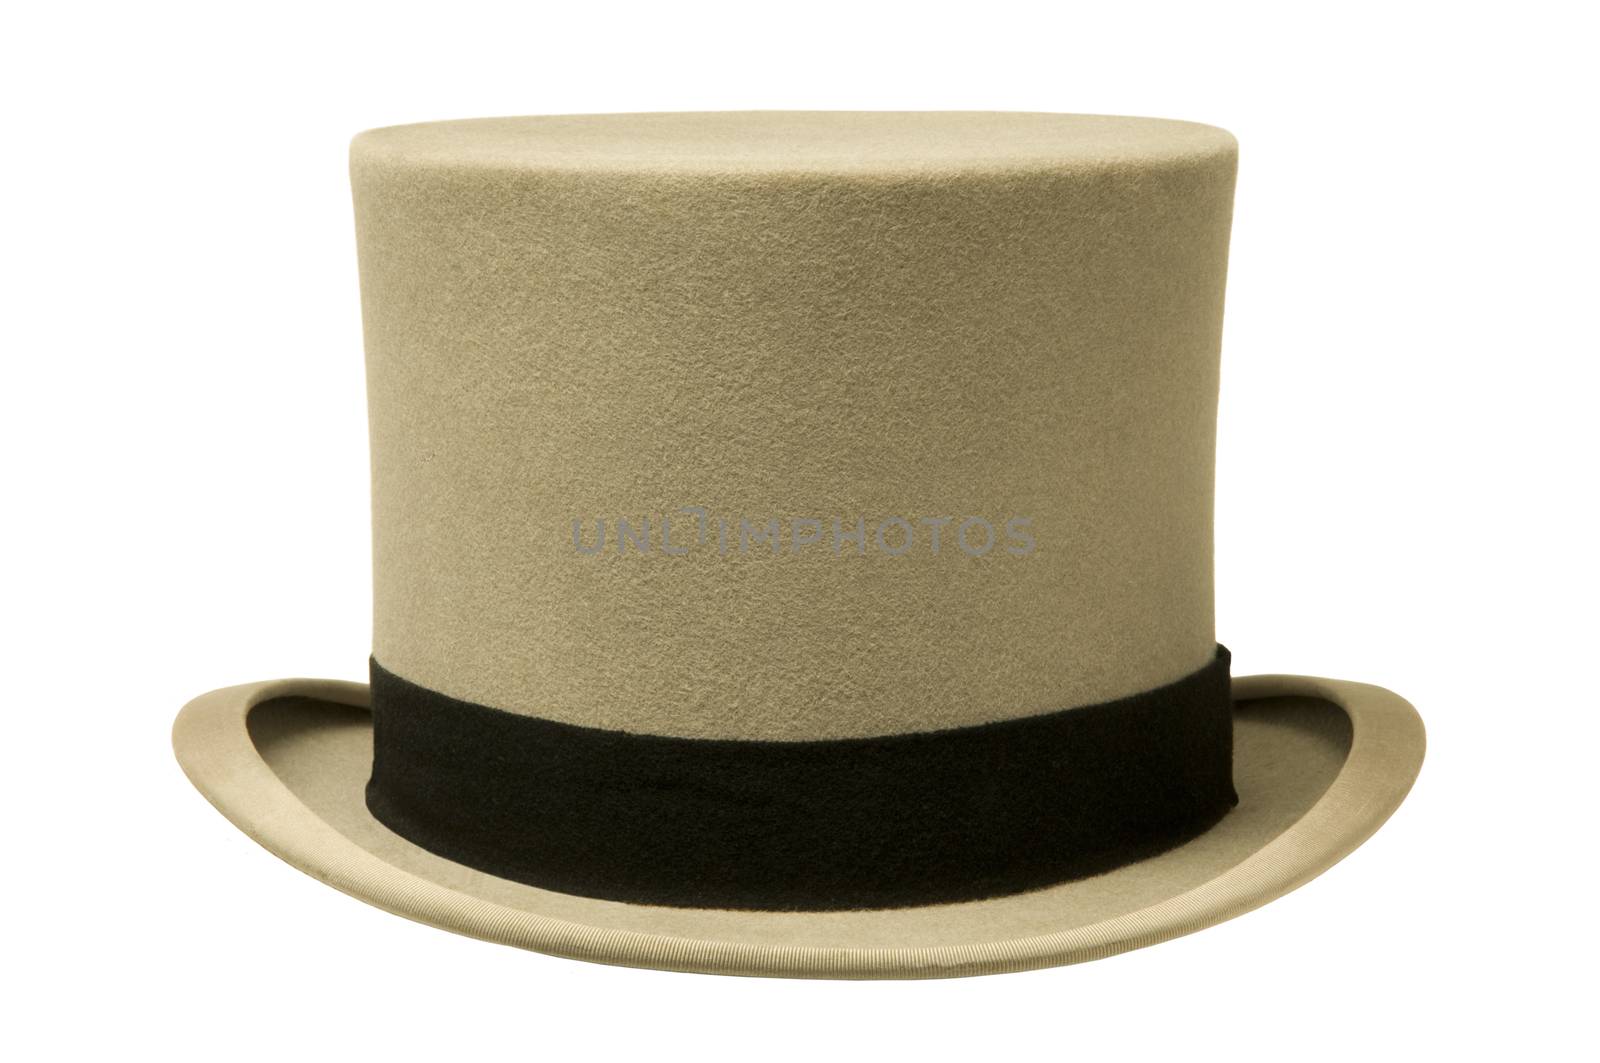 Vintage Gray Top Hat by Balefire9